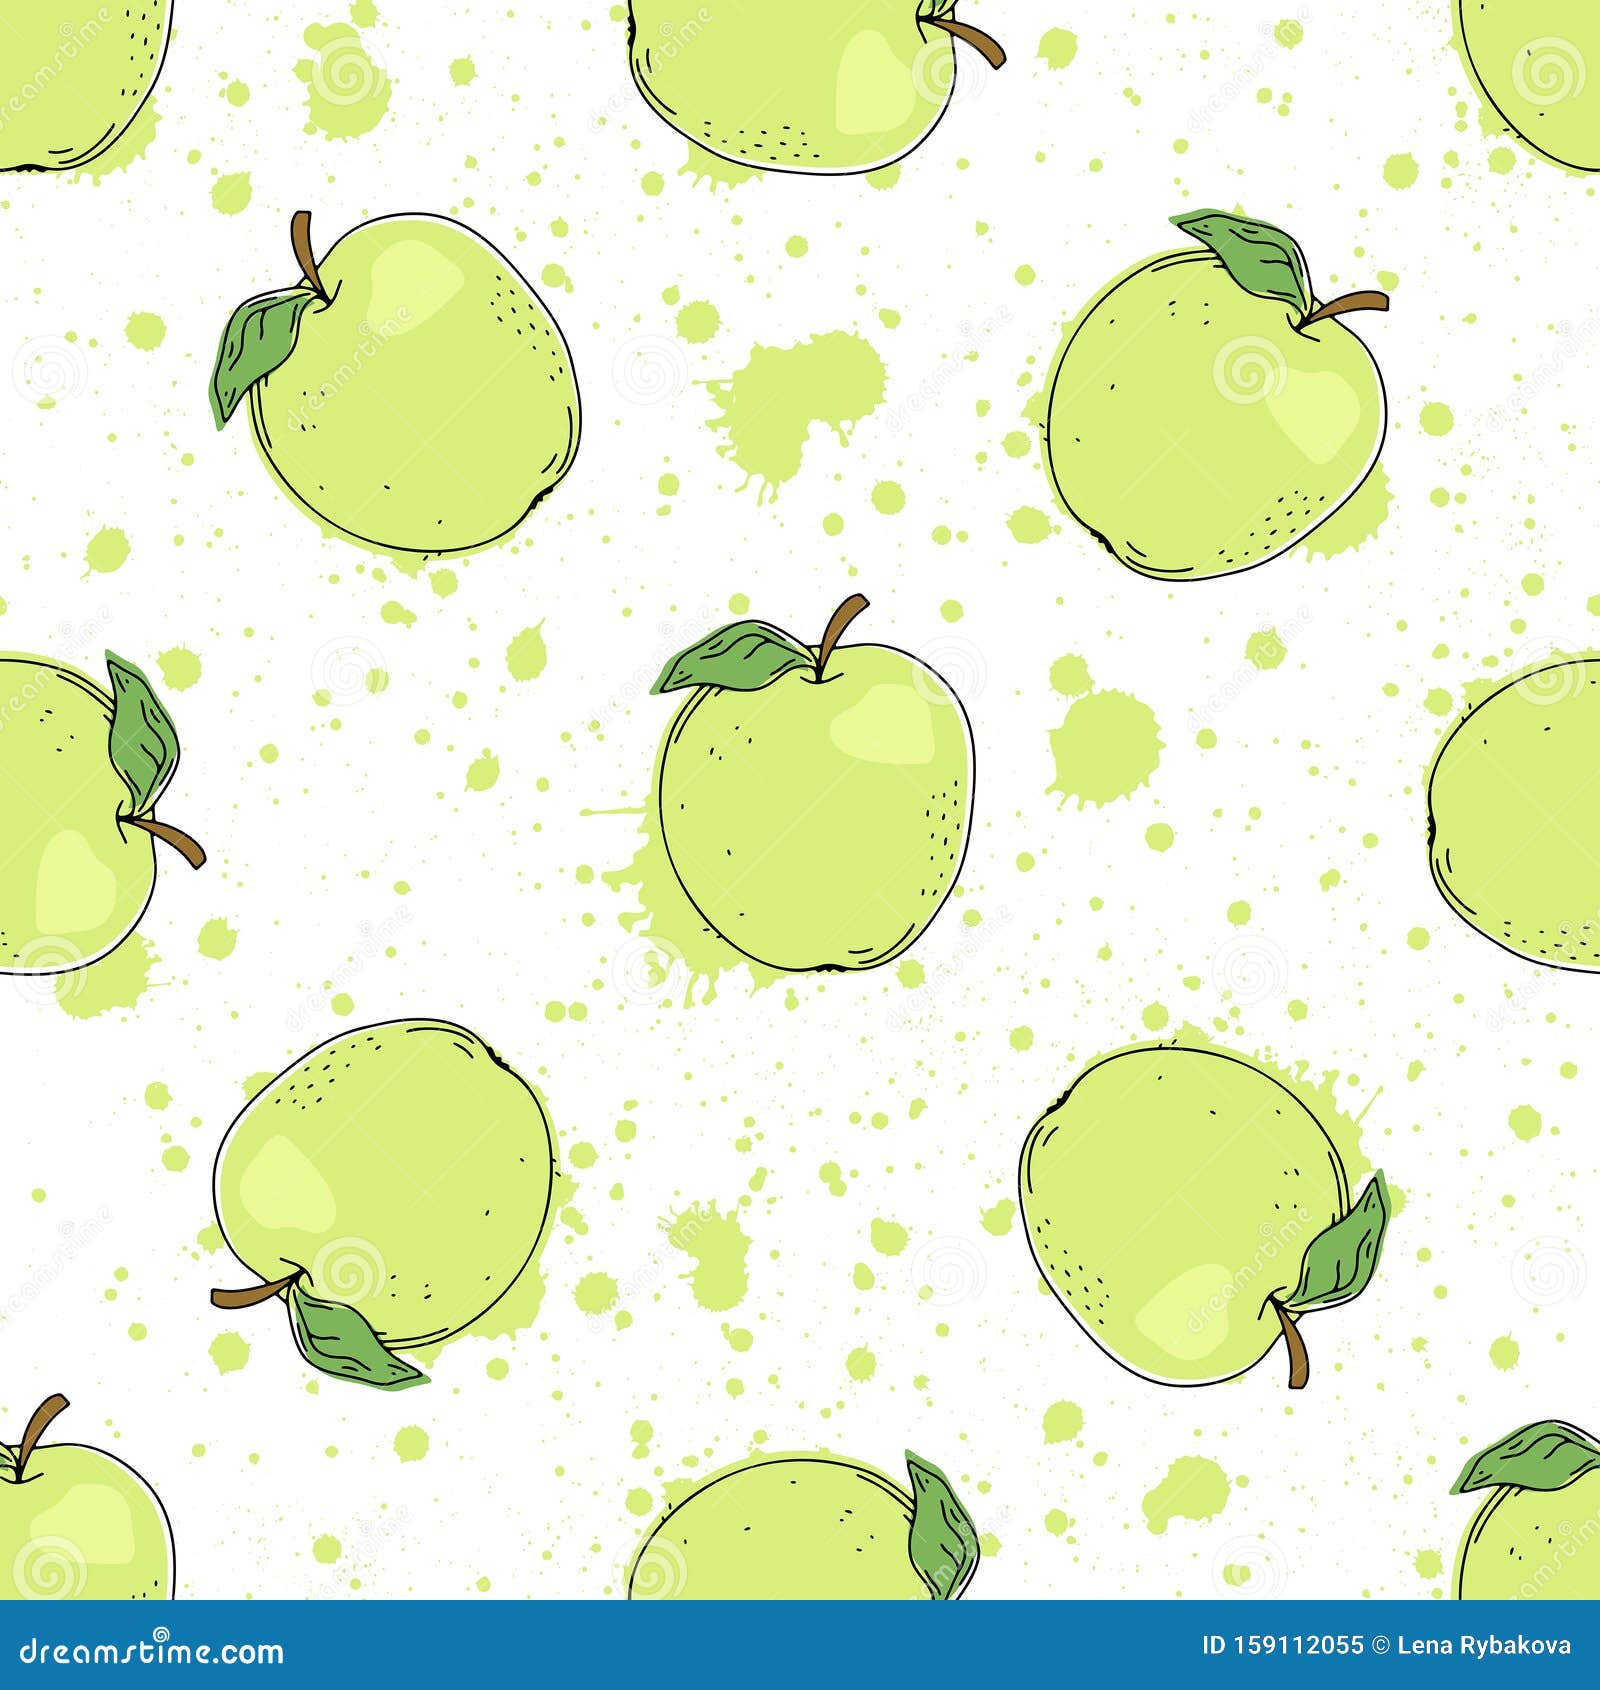 Hand Drawn Seamless Pattern with Apples Stock Illustration ...